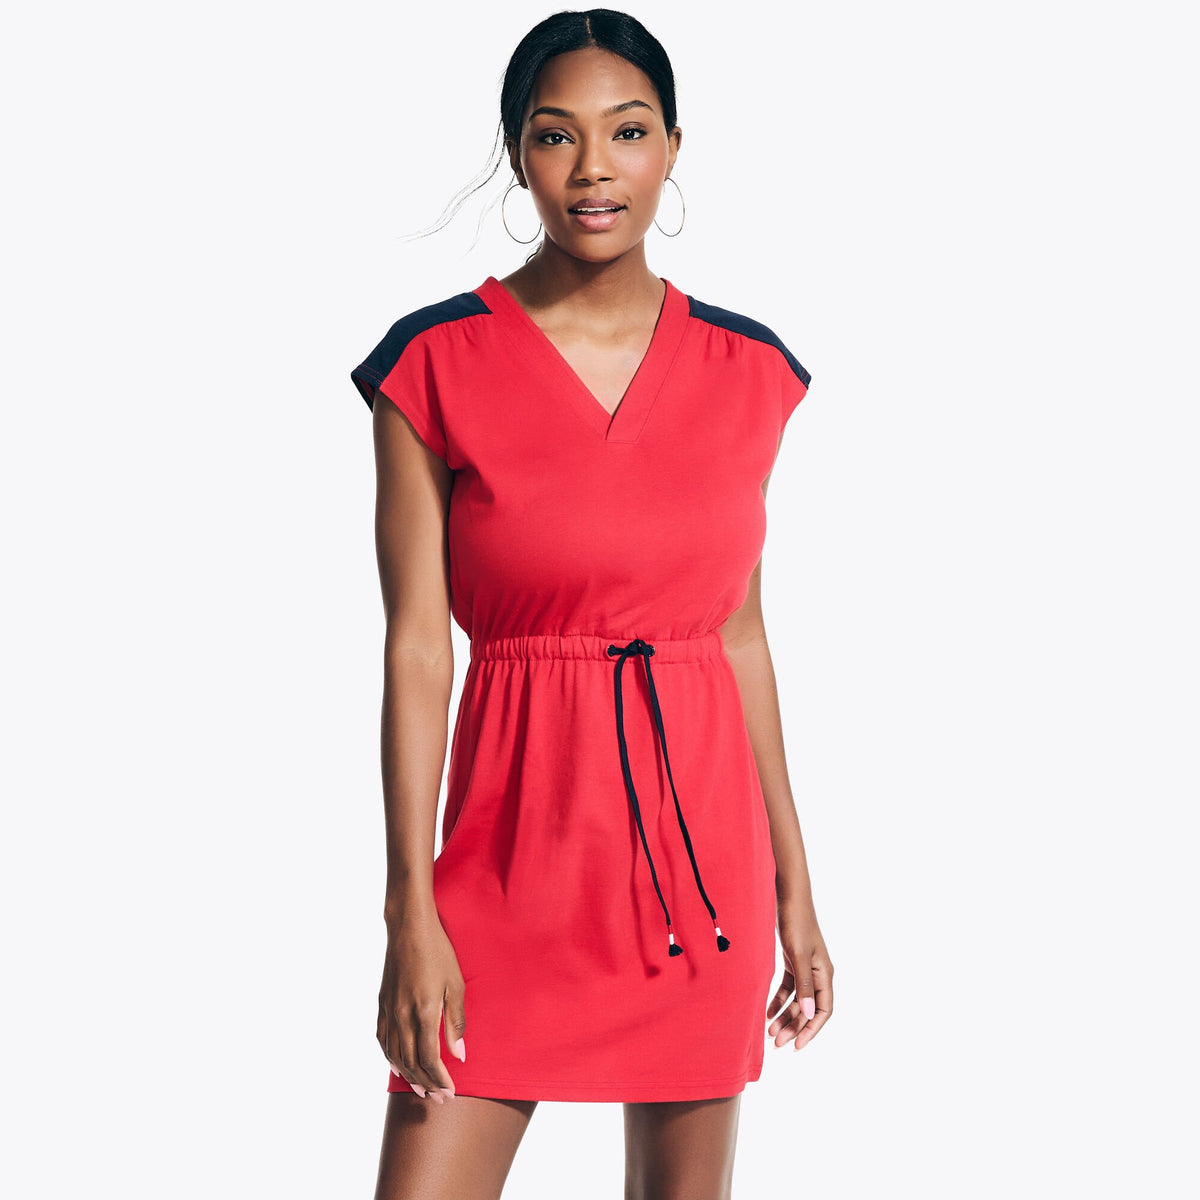 Nautica Women's Sustainably Crafted Knit Dress Tomales Red